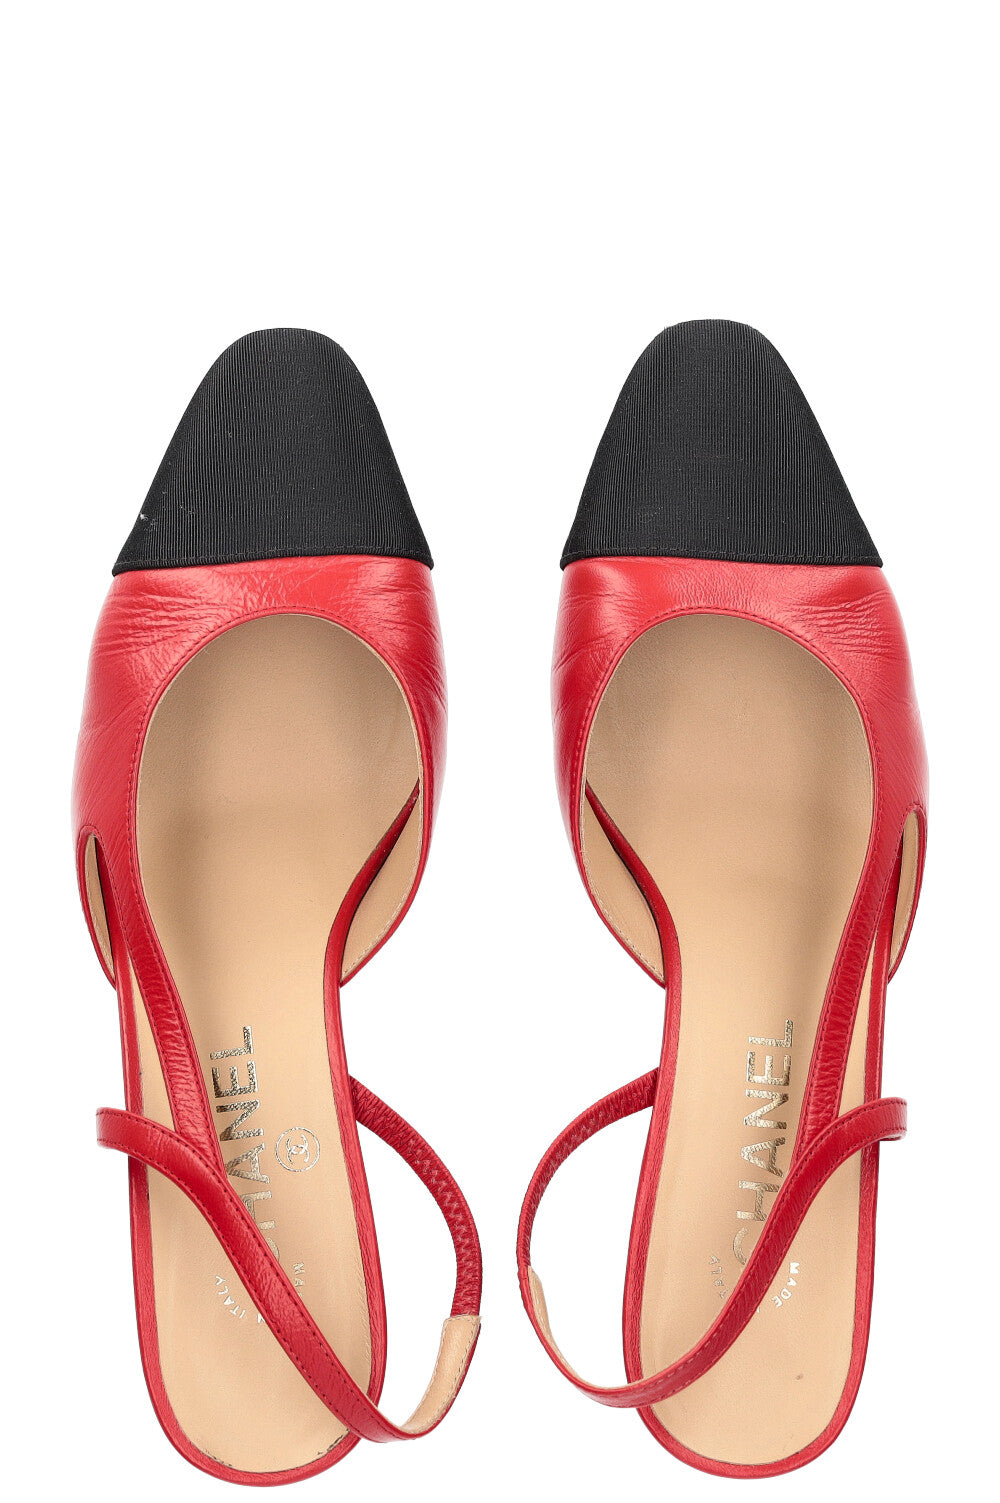 CHANEL Slingback Pumps Red